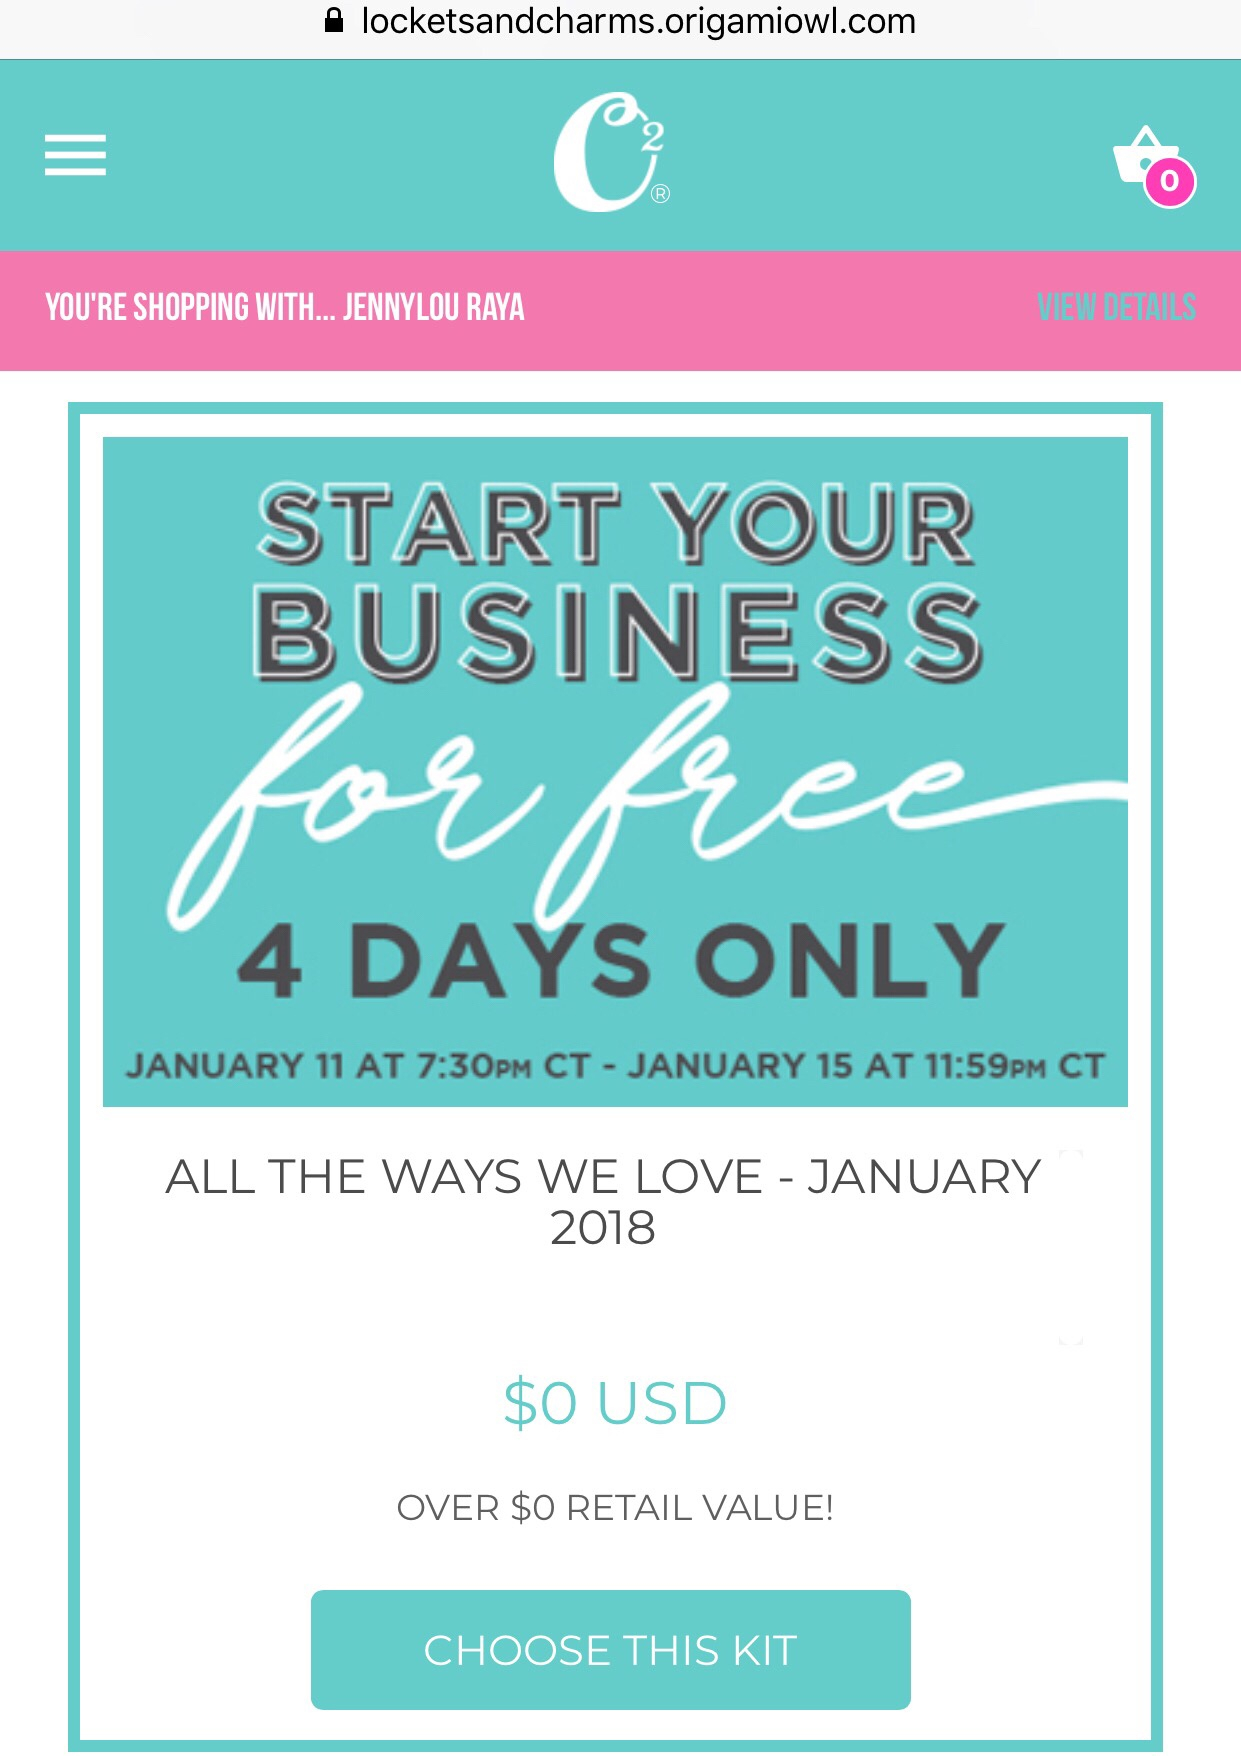 Selling Origami Owl 4 Days To Join Origami Owl For Free San Diego Origami Owl Lockets